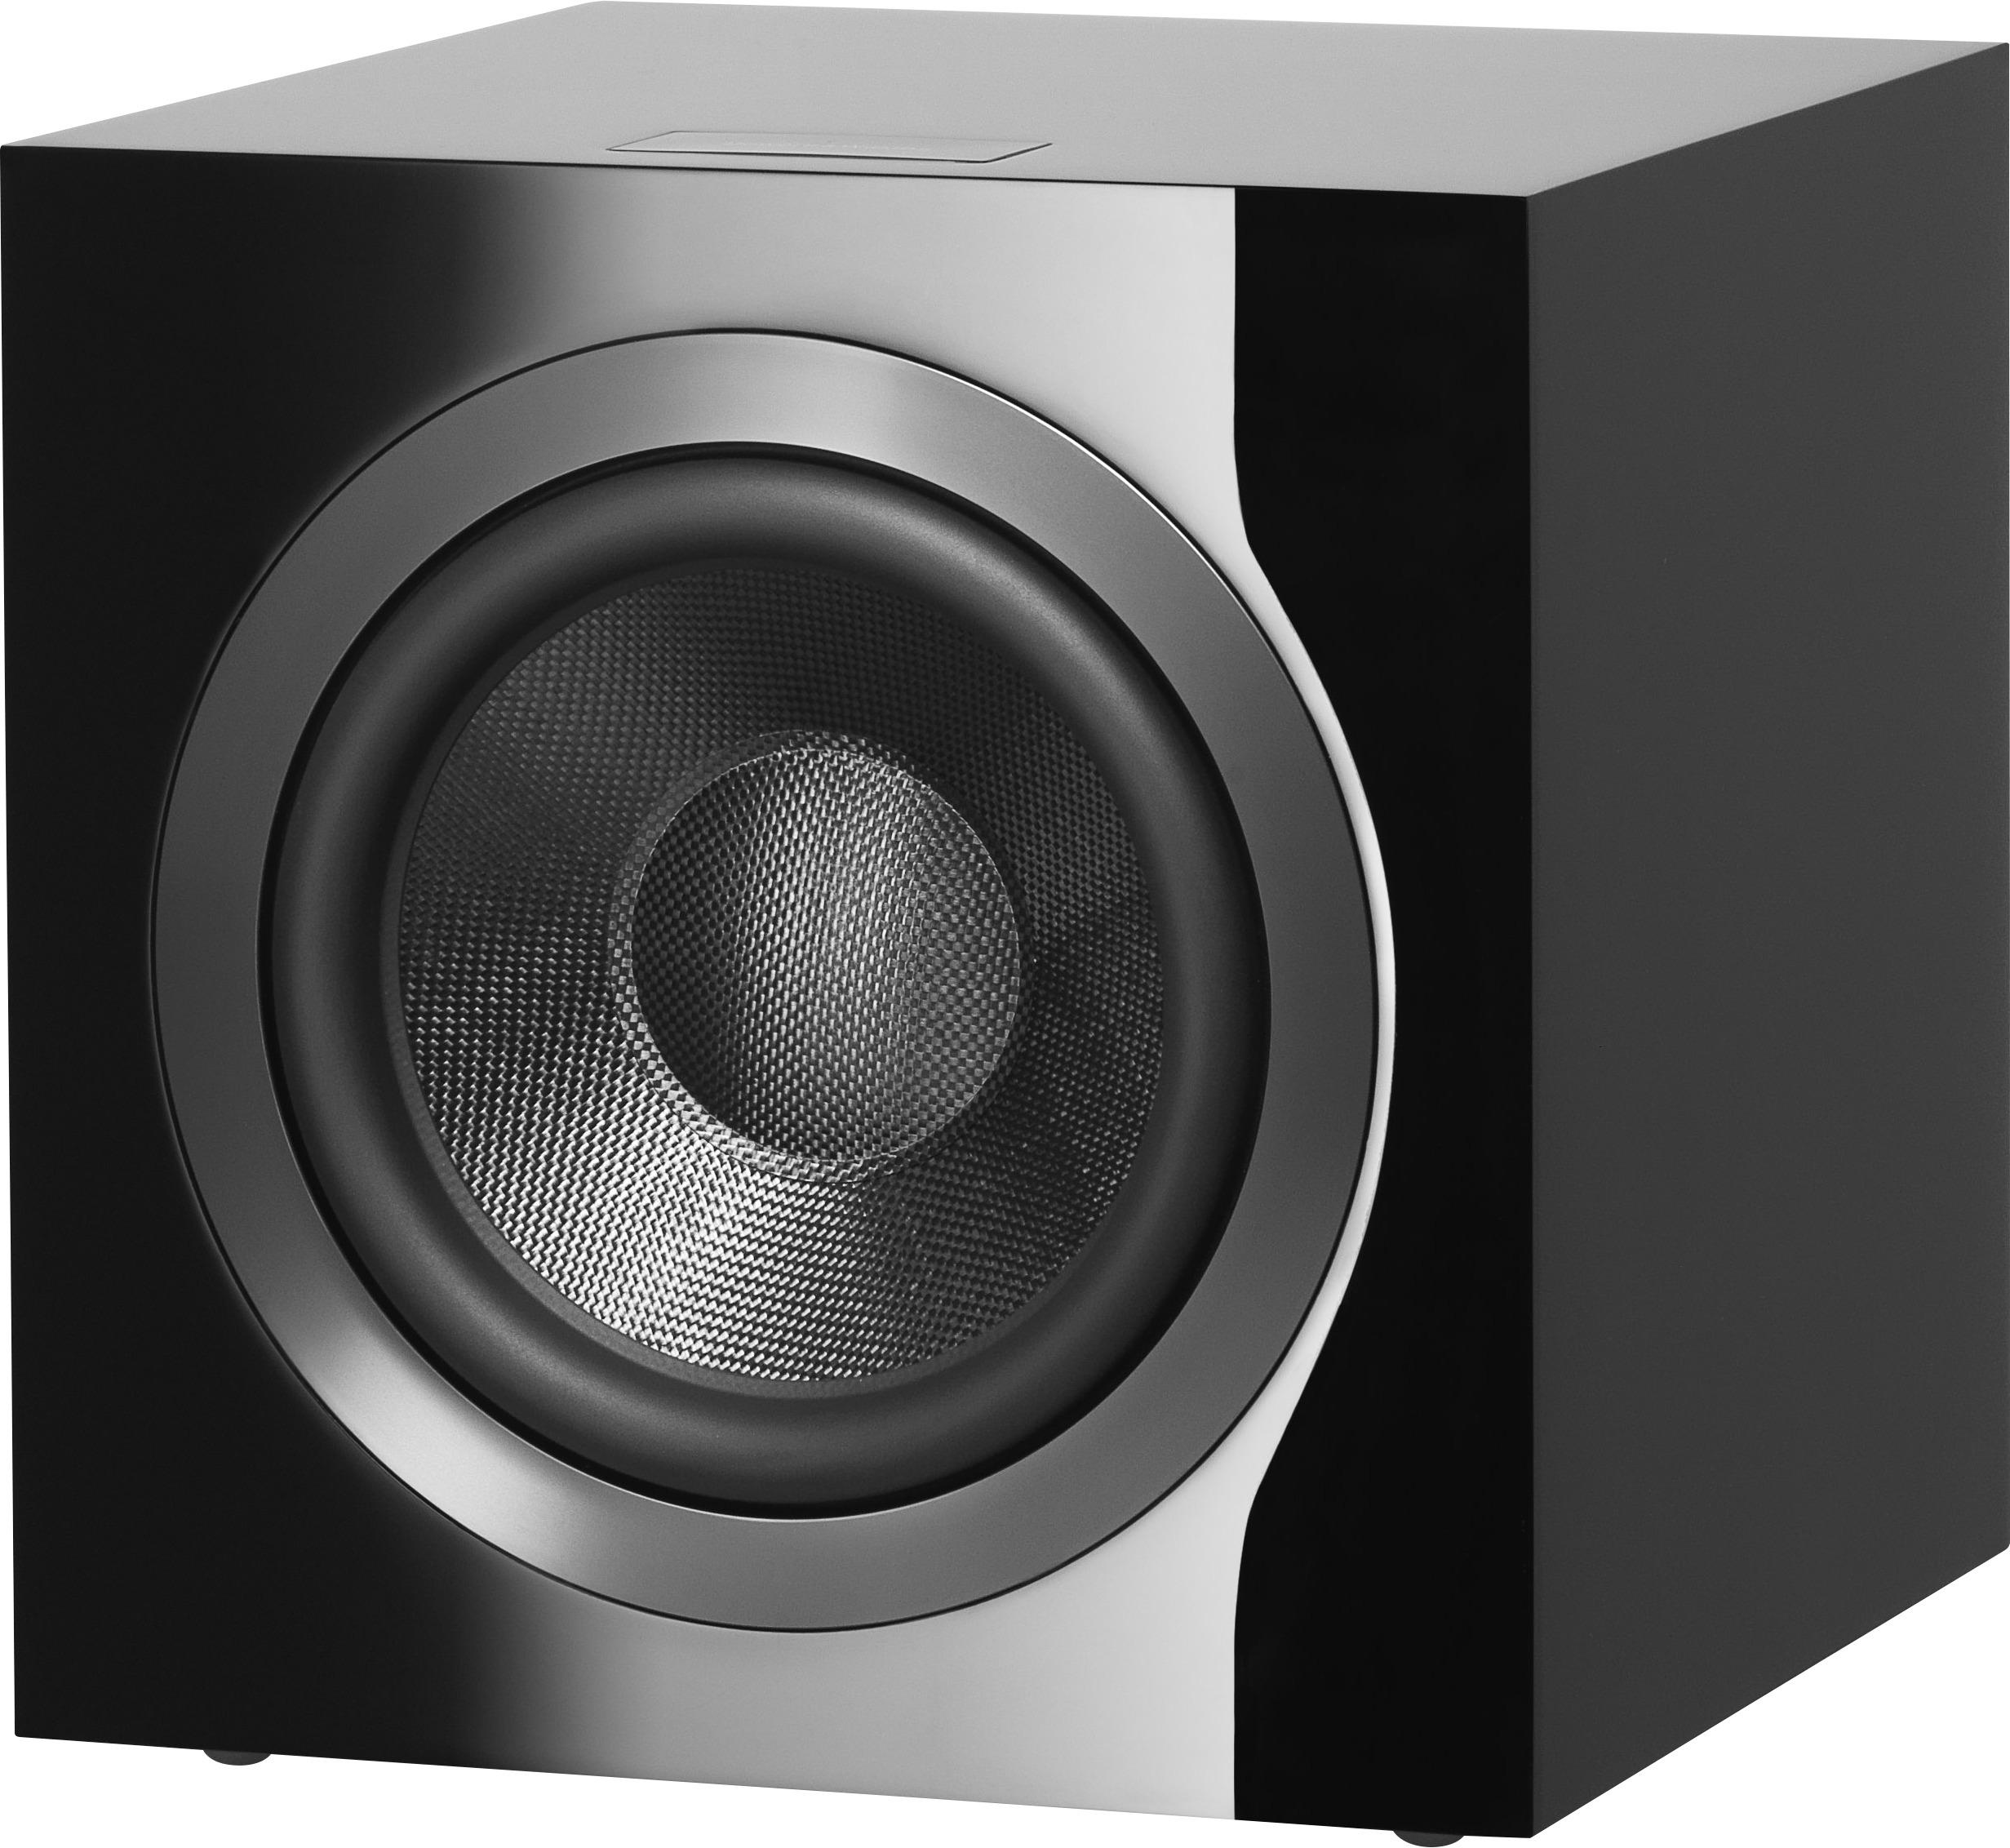 Angle View: Bowers & Wilkins - 700 Series 10" 1000W Powered Subwoofer - Gloss black